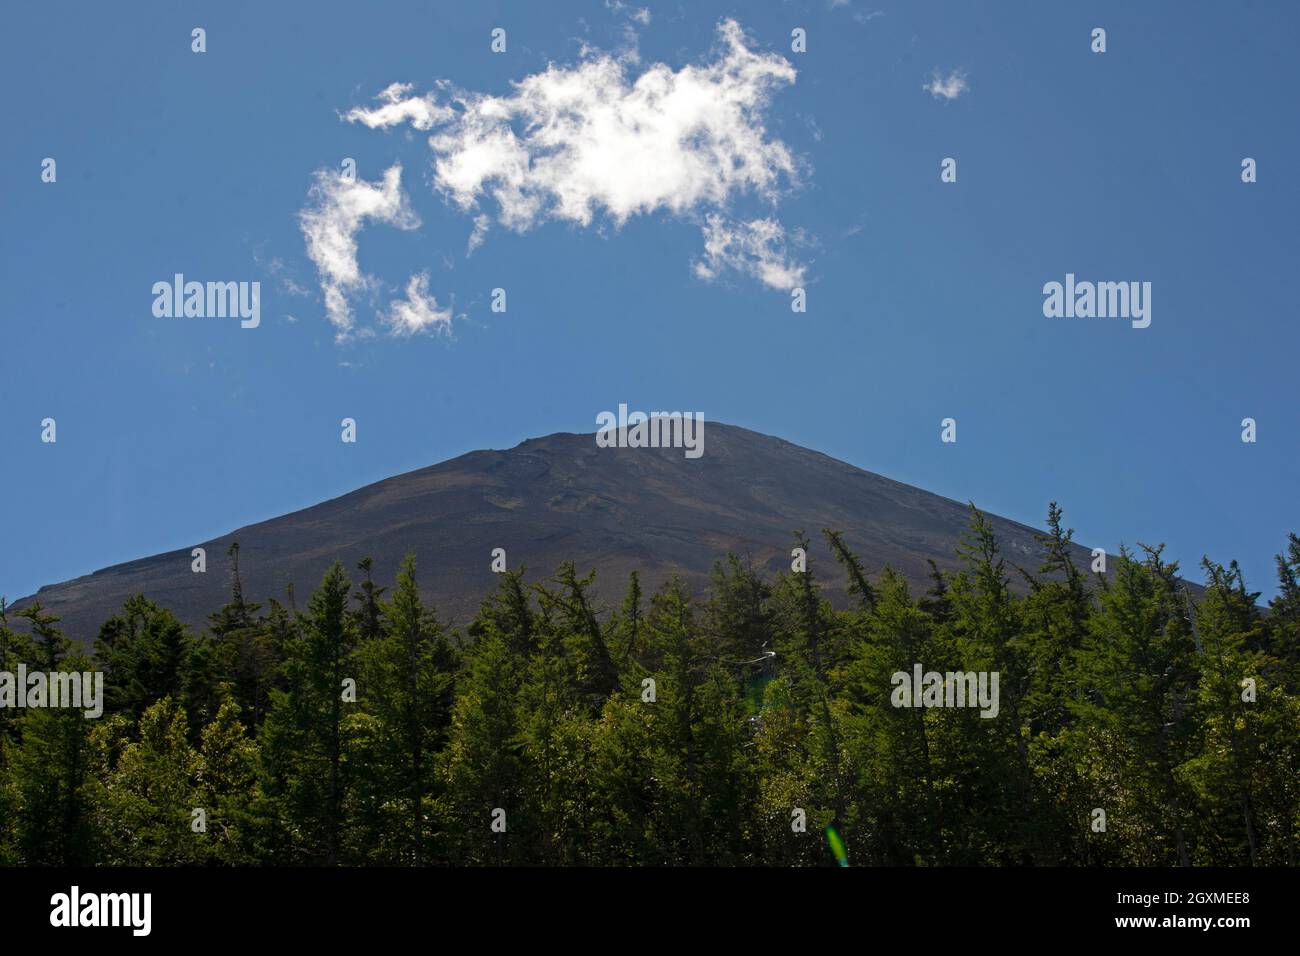 Clear view of Mount Fuji from the 5th Station in the mountain, Japan Stock Photo